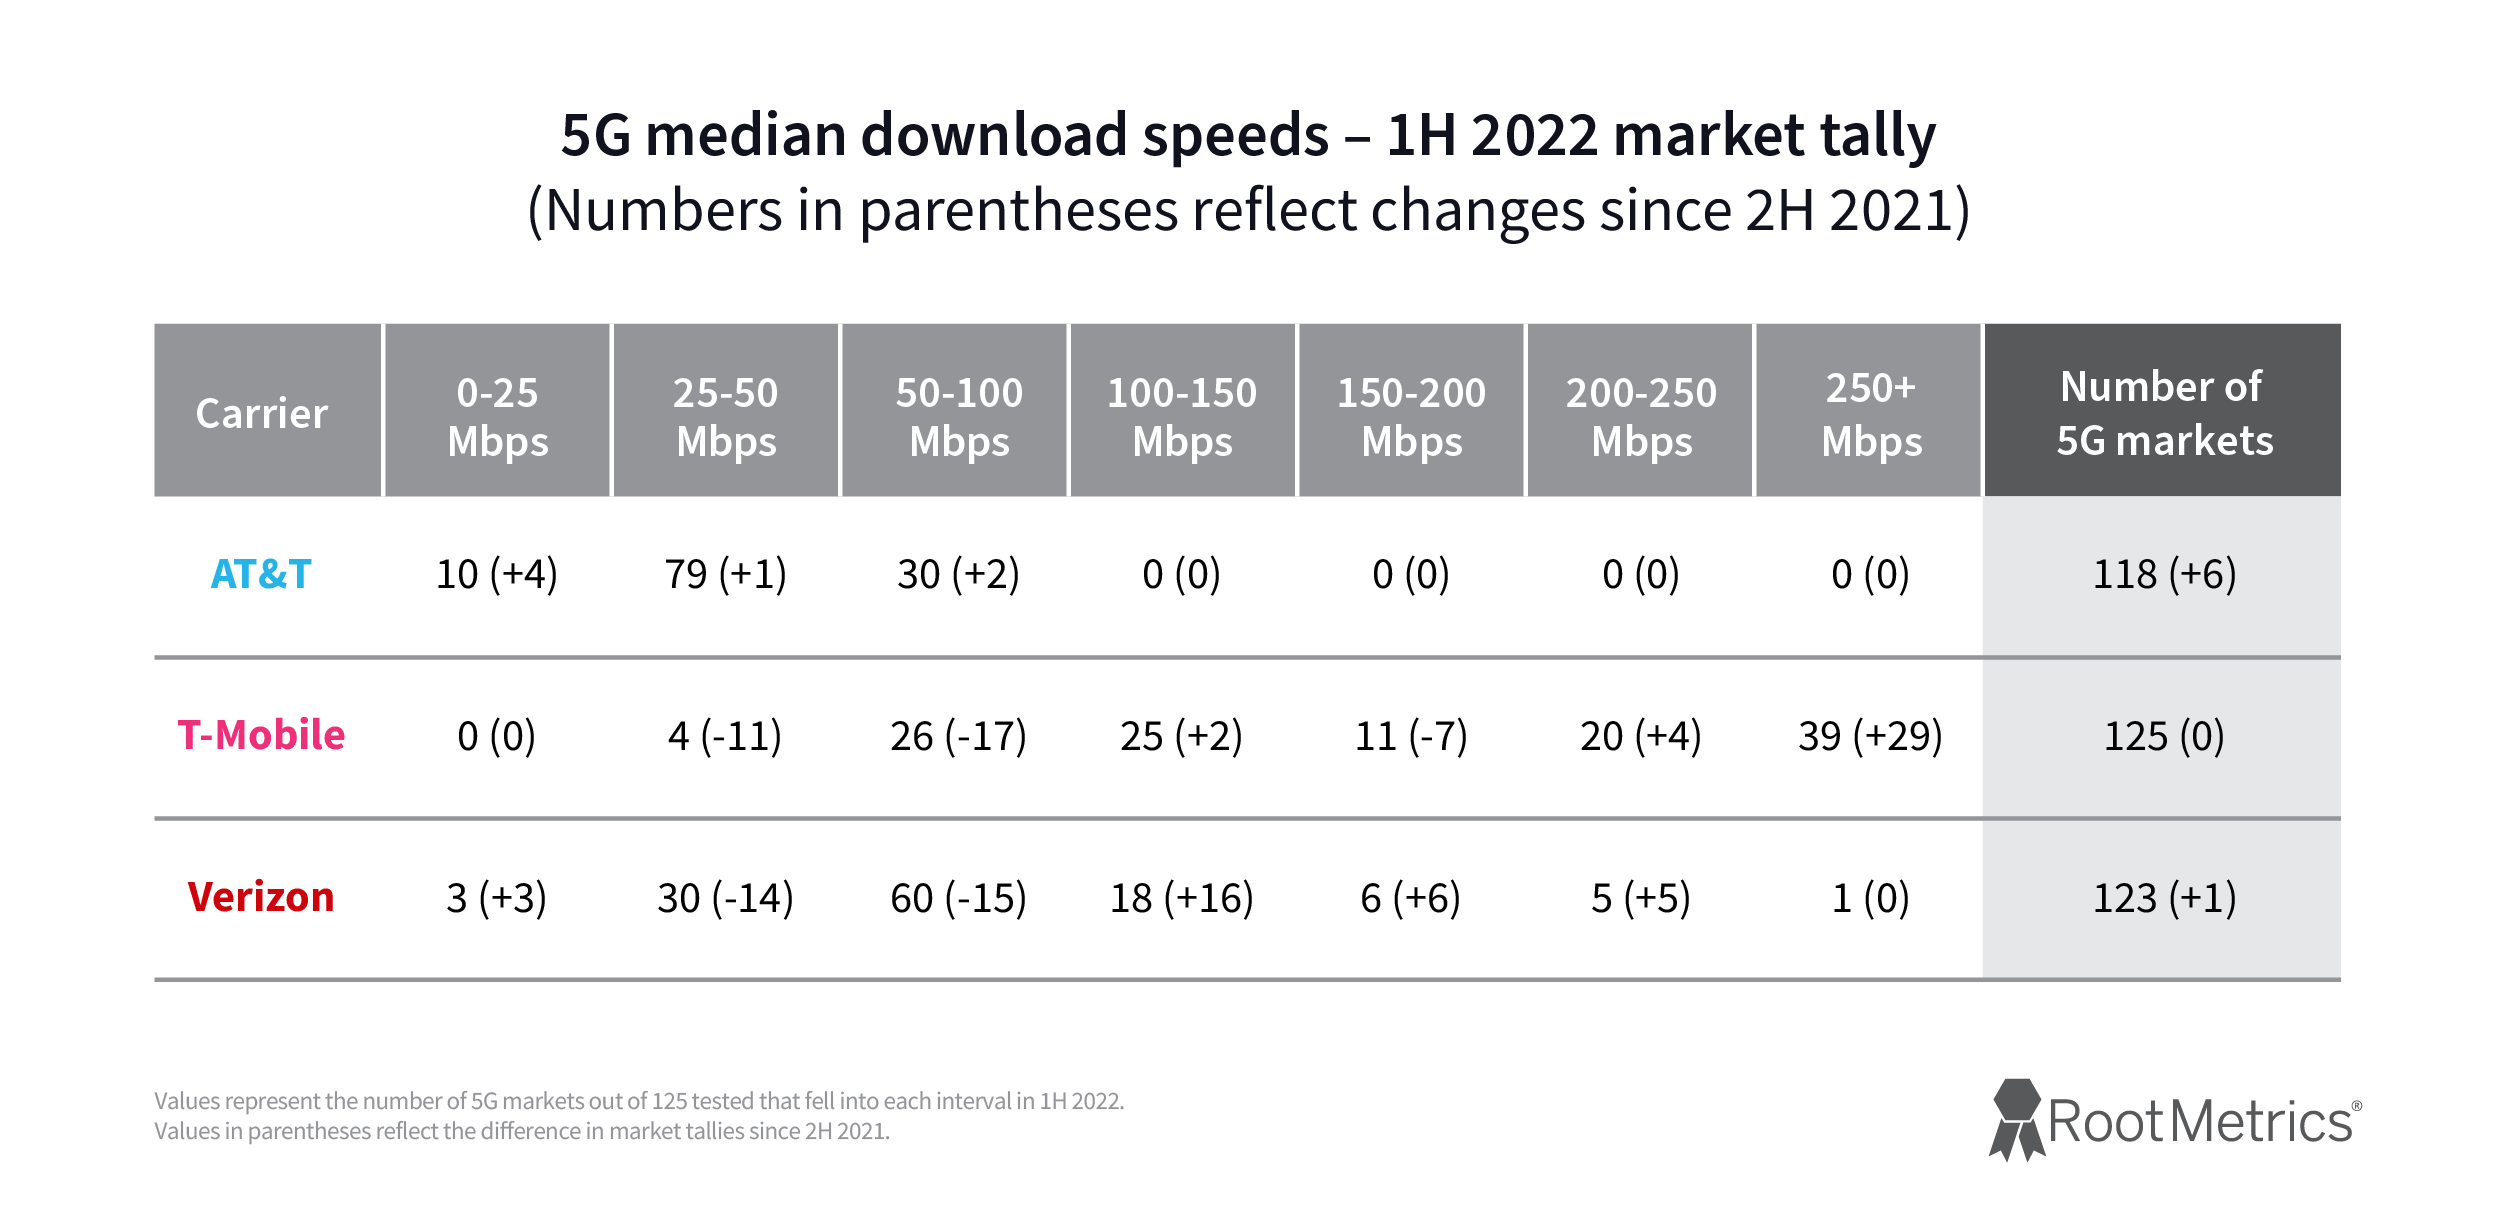 A graphic from RootMetrics showing 5G median download speeds